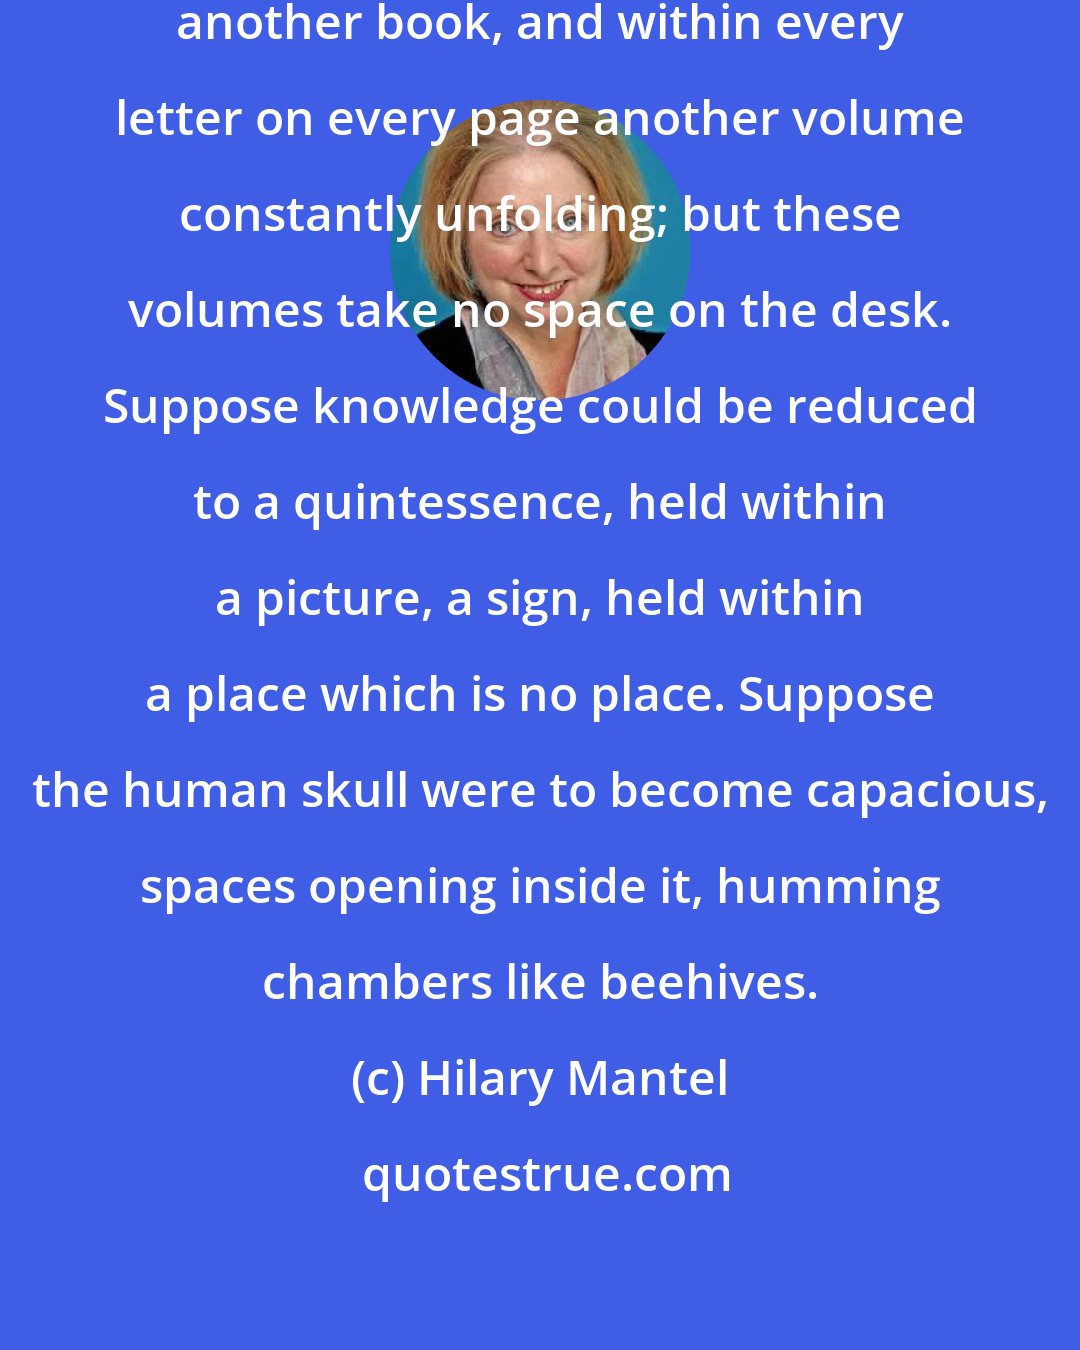 Hilary Mantel: Suppose within each book there is another book, and within every letter on every page another volume constantly unfolding; but these volumes take no space on the desk. Suppose knowledge could be reduced to a quintessence, held within a picture, a sign, held within a place which is no place. Suppose the human skull were to become capacious, spaces opening inside it, humming chambers like beehives.